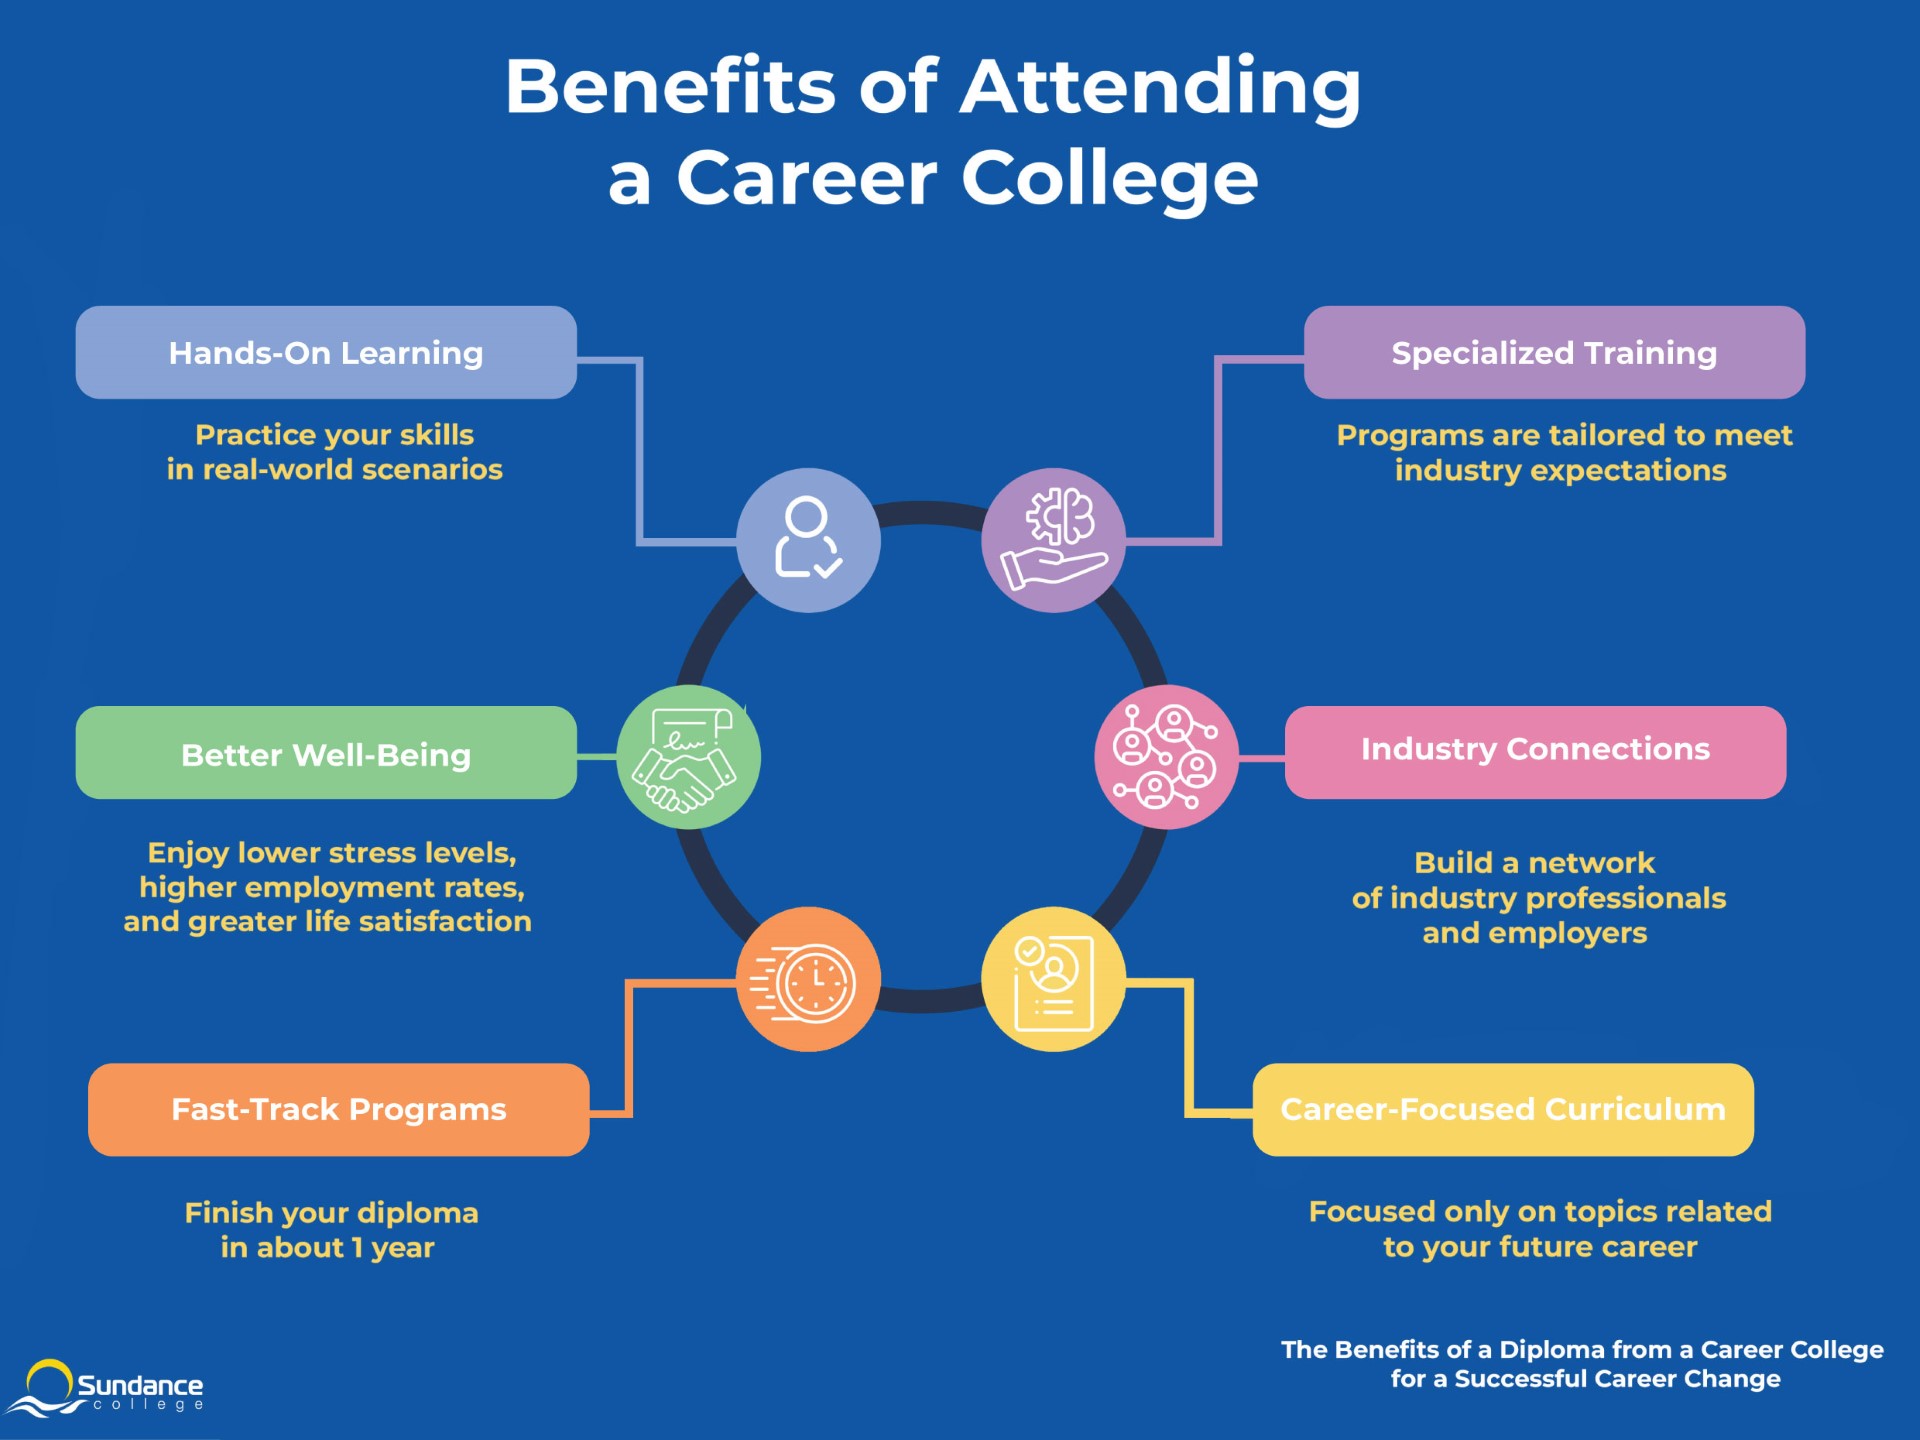 An infographic that illustrates the benefits of attending career college for a career change including hands-on learning, specialized training, industry connections, career-focused curriculum, fast-track programs, increased employment prospects, and better well-being created by Sundance College.